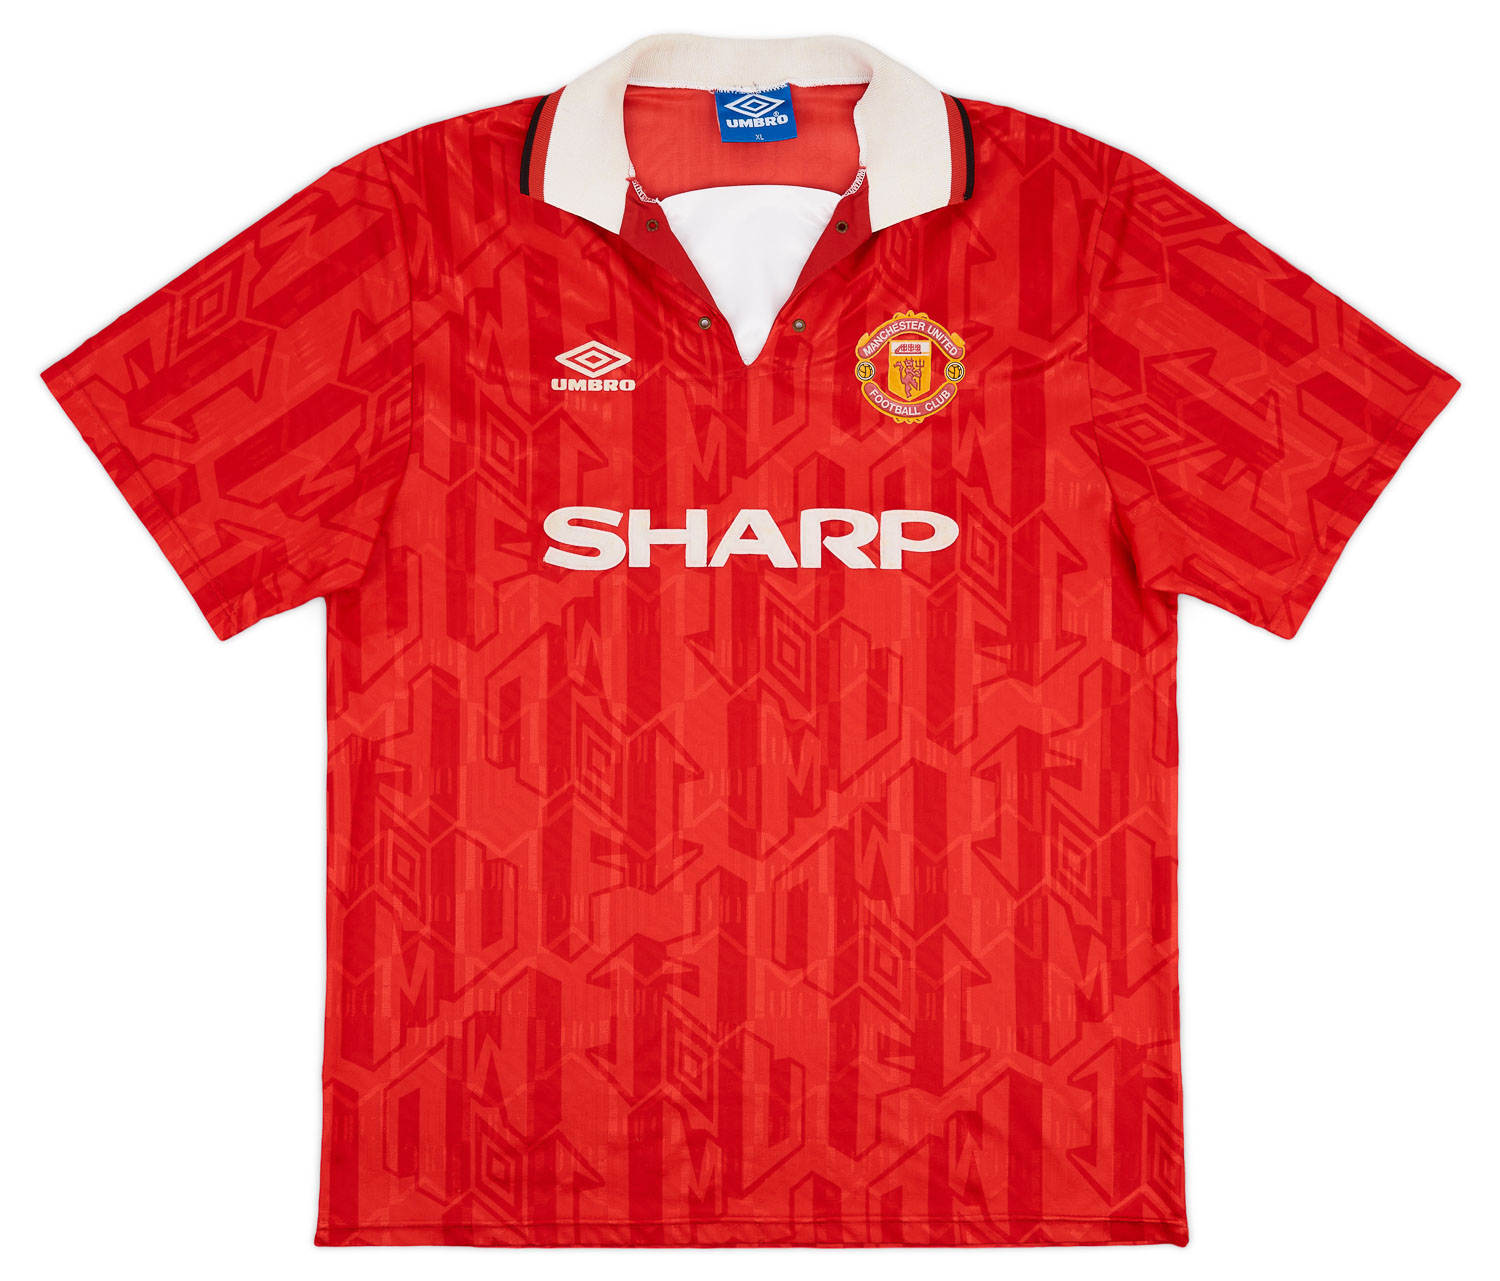 1992-94 Manchester United Home Shirt - 5/10 - ()